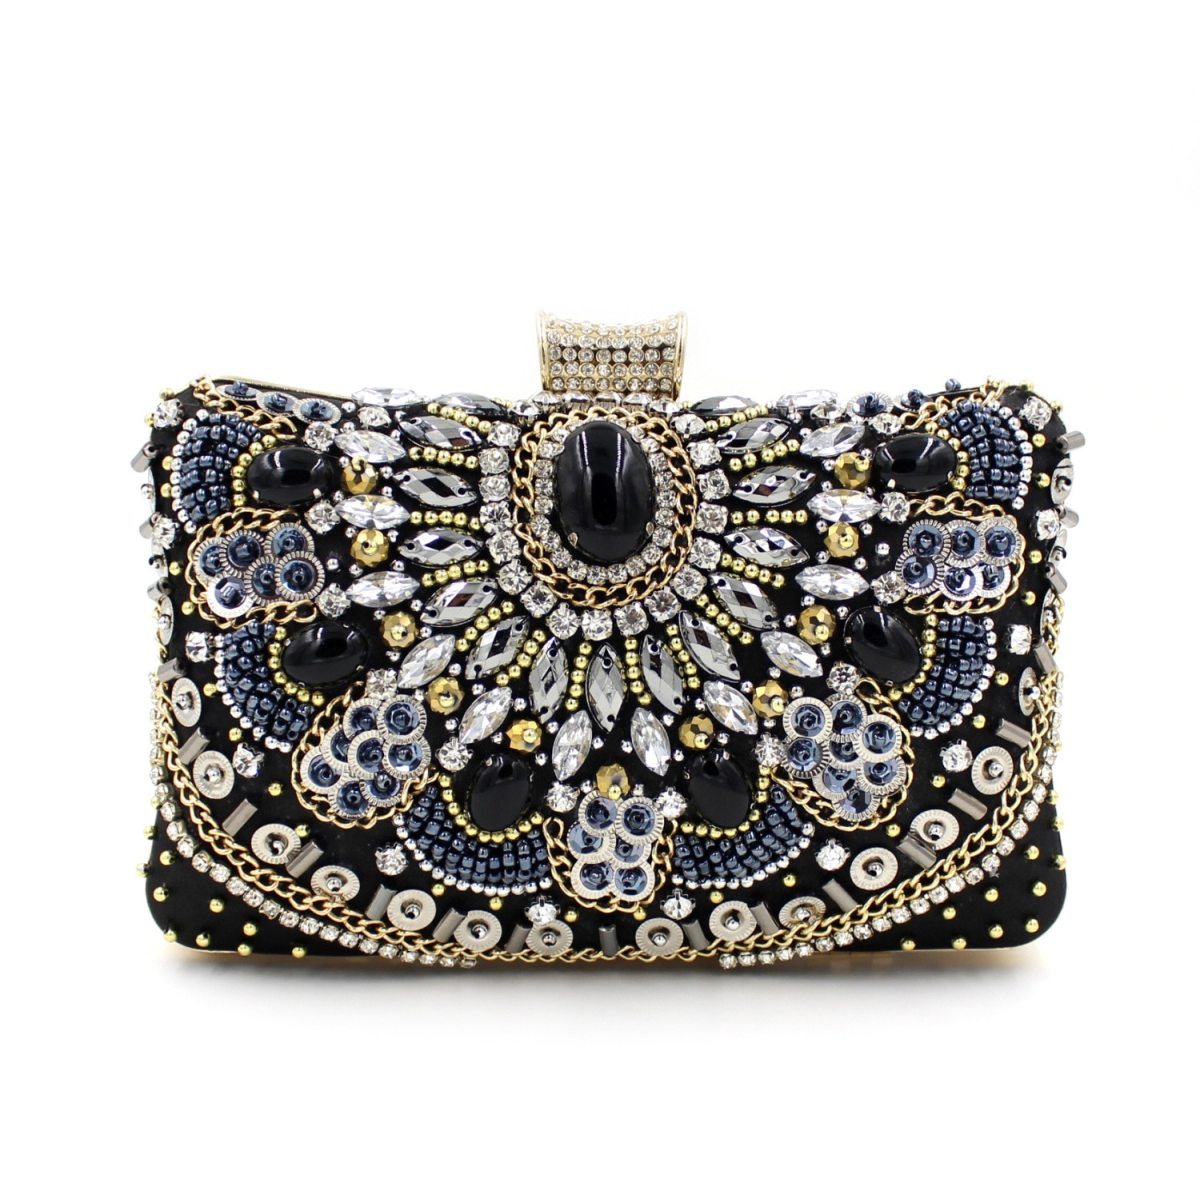 Beaded Clutch Purses: The Timeless Accessory Every Woman Needs in Her ...